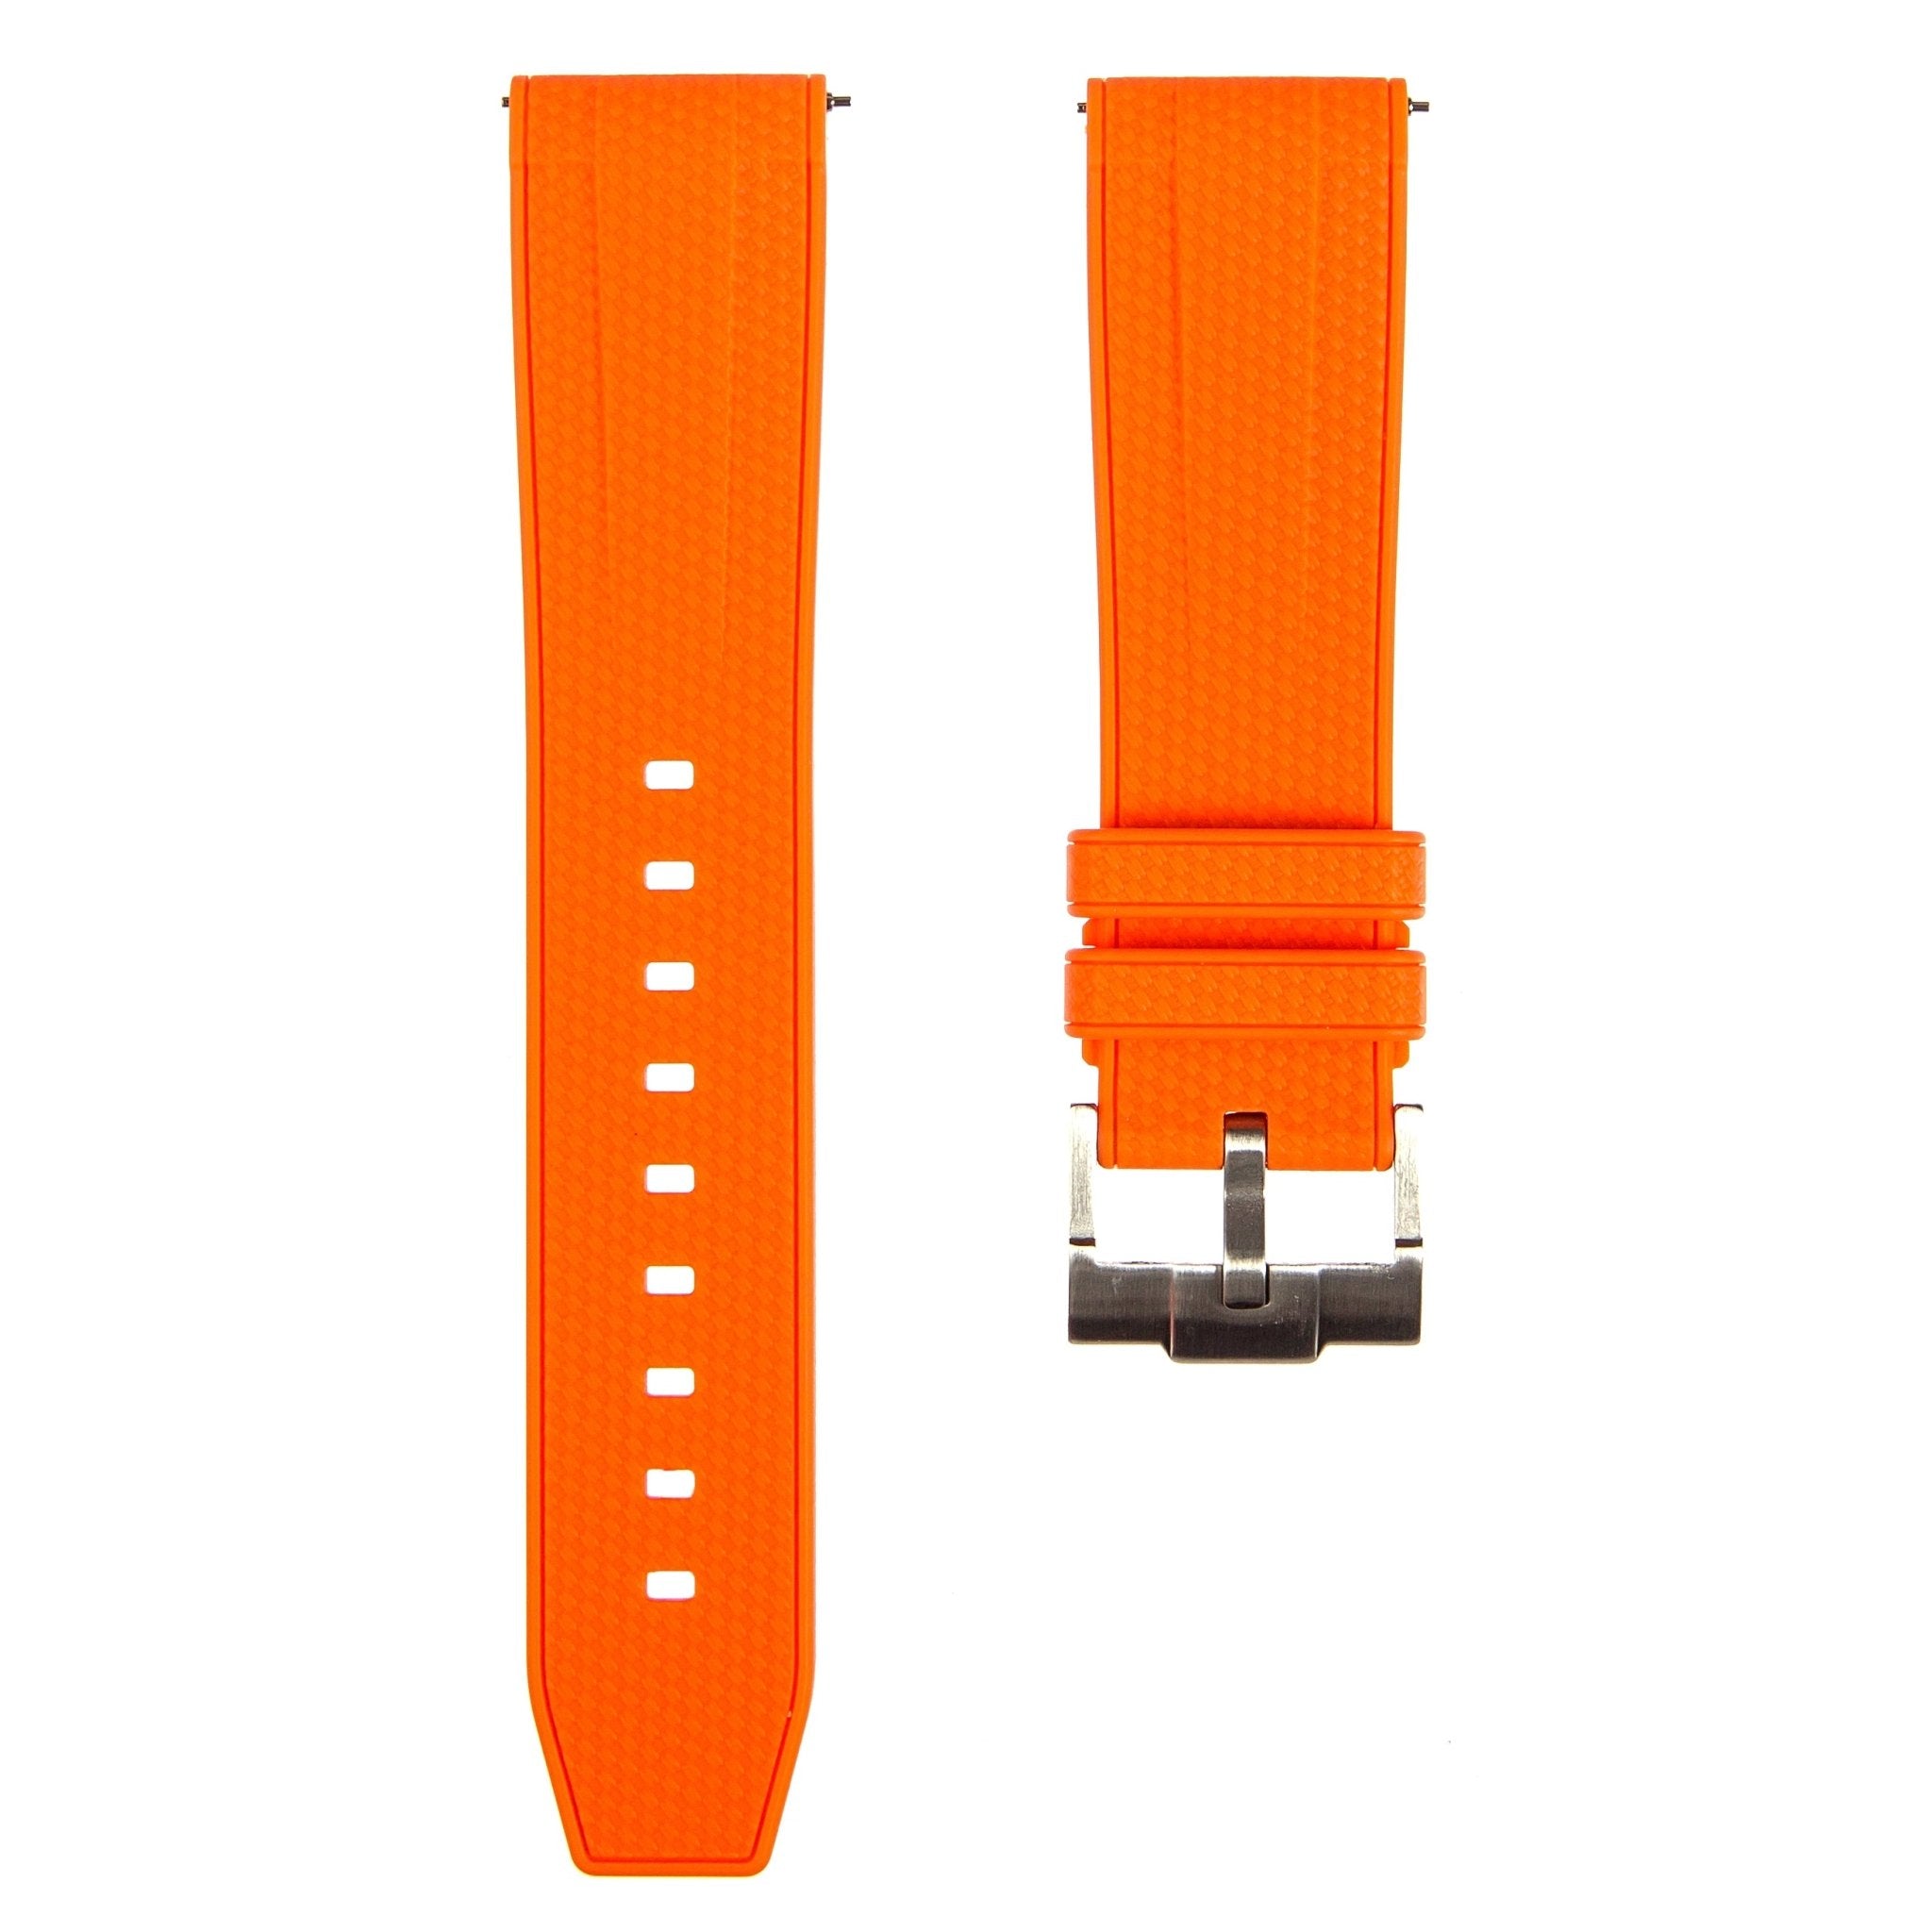 Flexweave Premium SIlicone Rubber Strap - Quick-Release - Compatible with Omega Moonwatch – Orange (2423) -Strapseeker